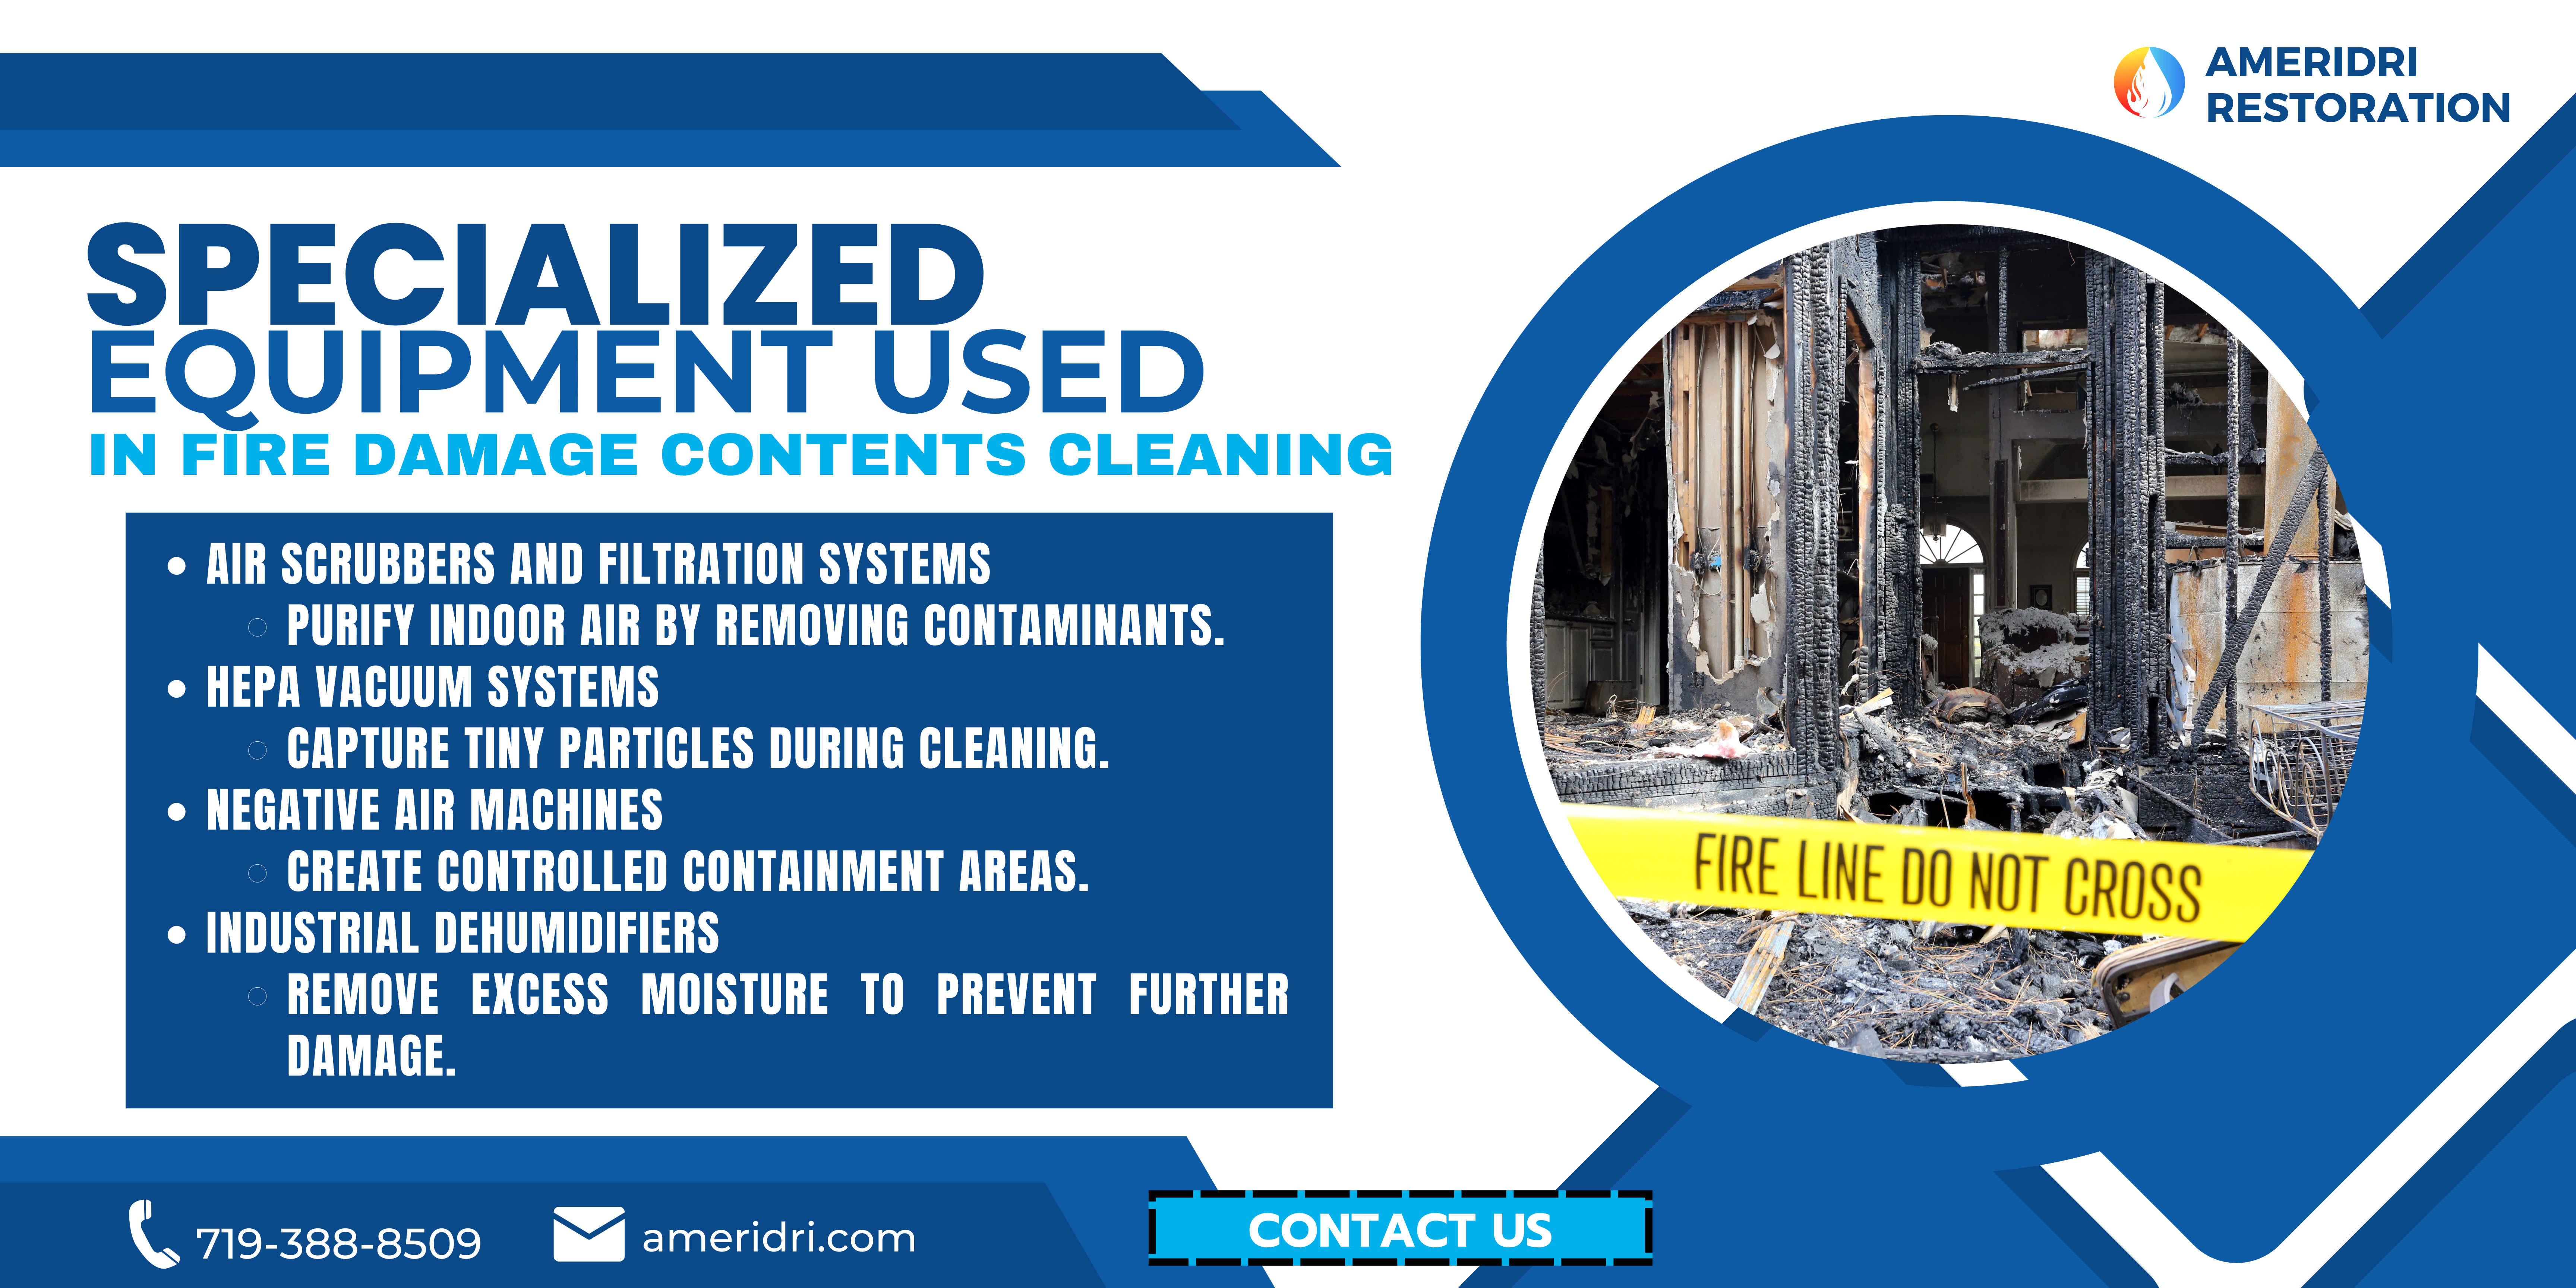 Specialized Techniques and Equipment Used in Fire Damage Contents Cleaning